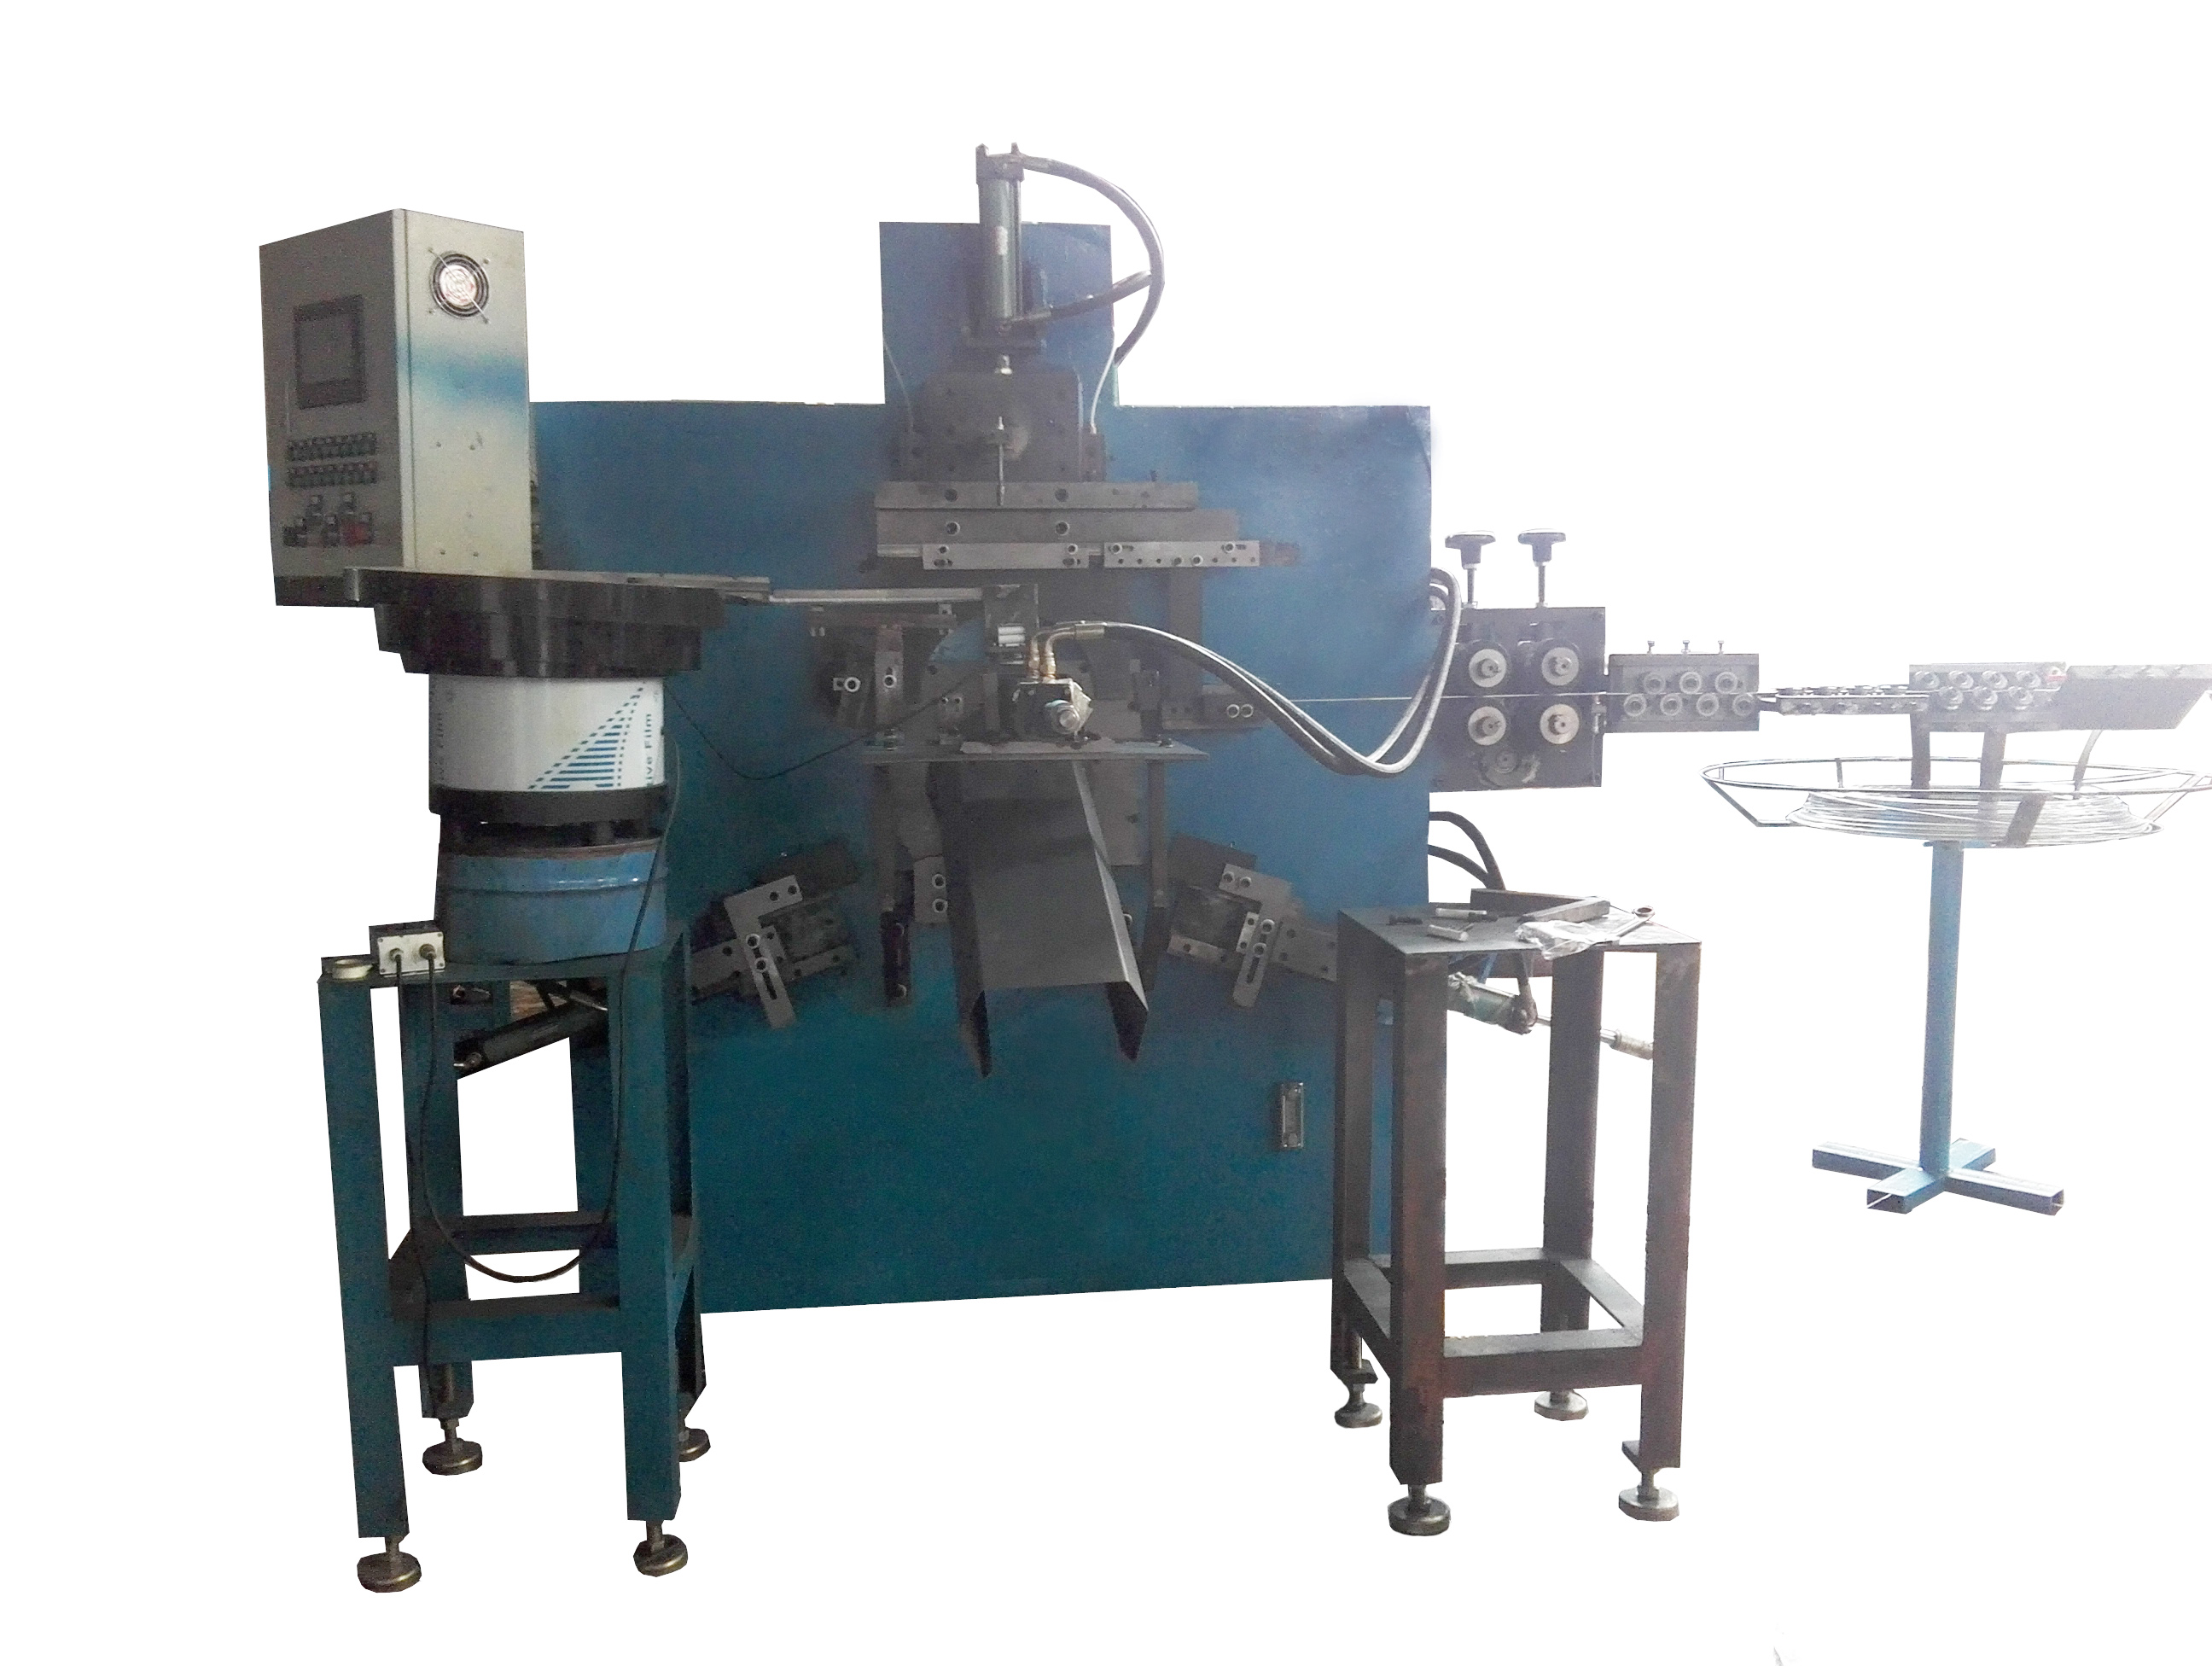 Hydraulic bending machine Forming Machine  2-6mm 2-7mmIron wire, stainless steel wire , bending machine for metal wire